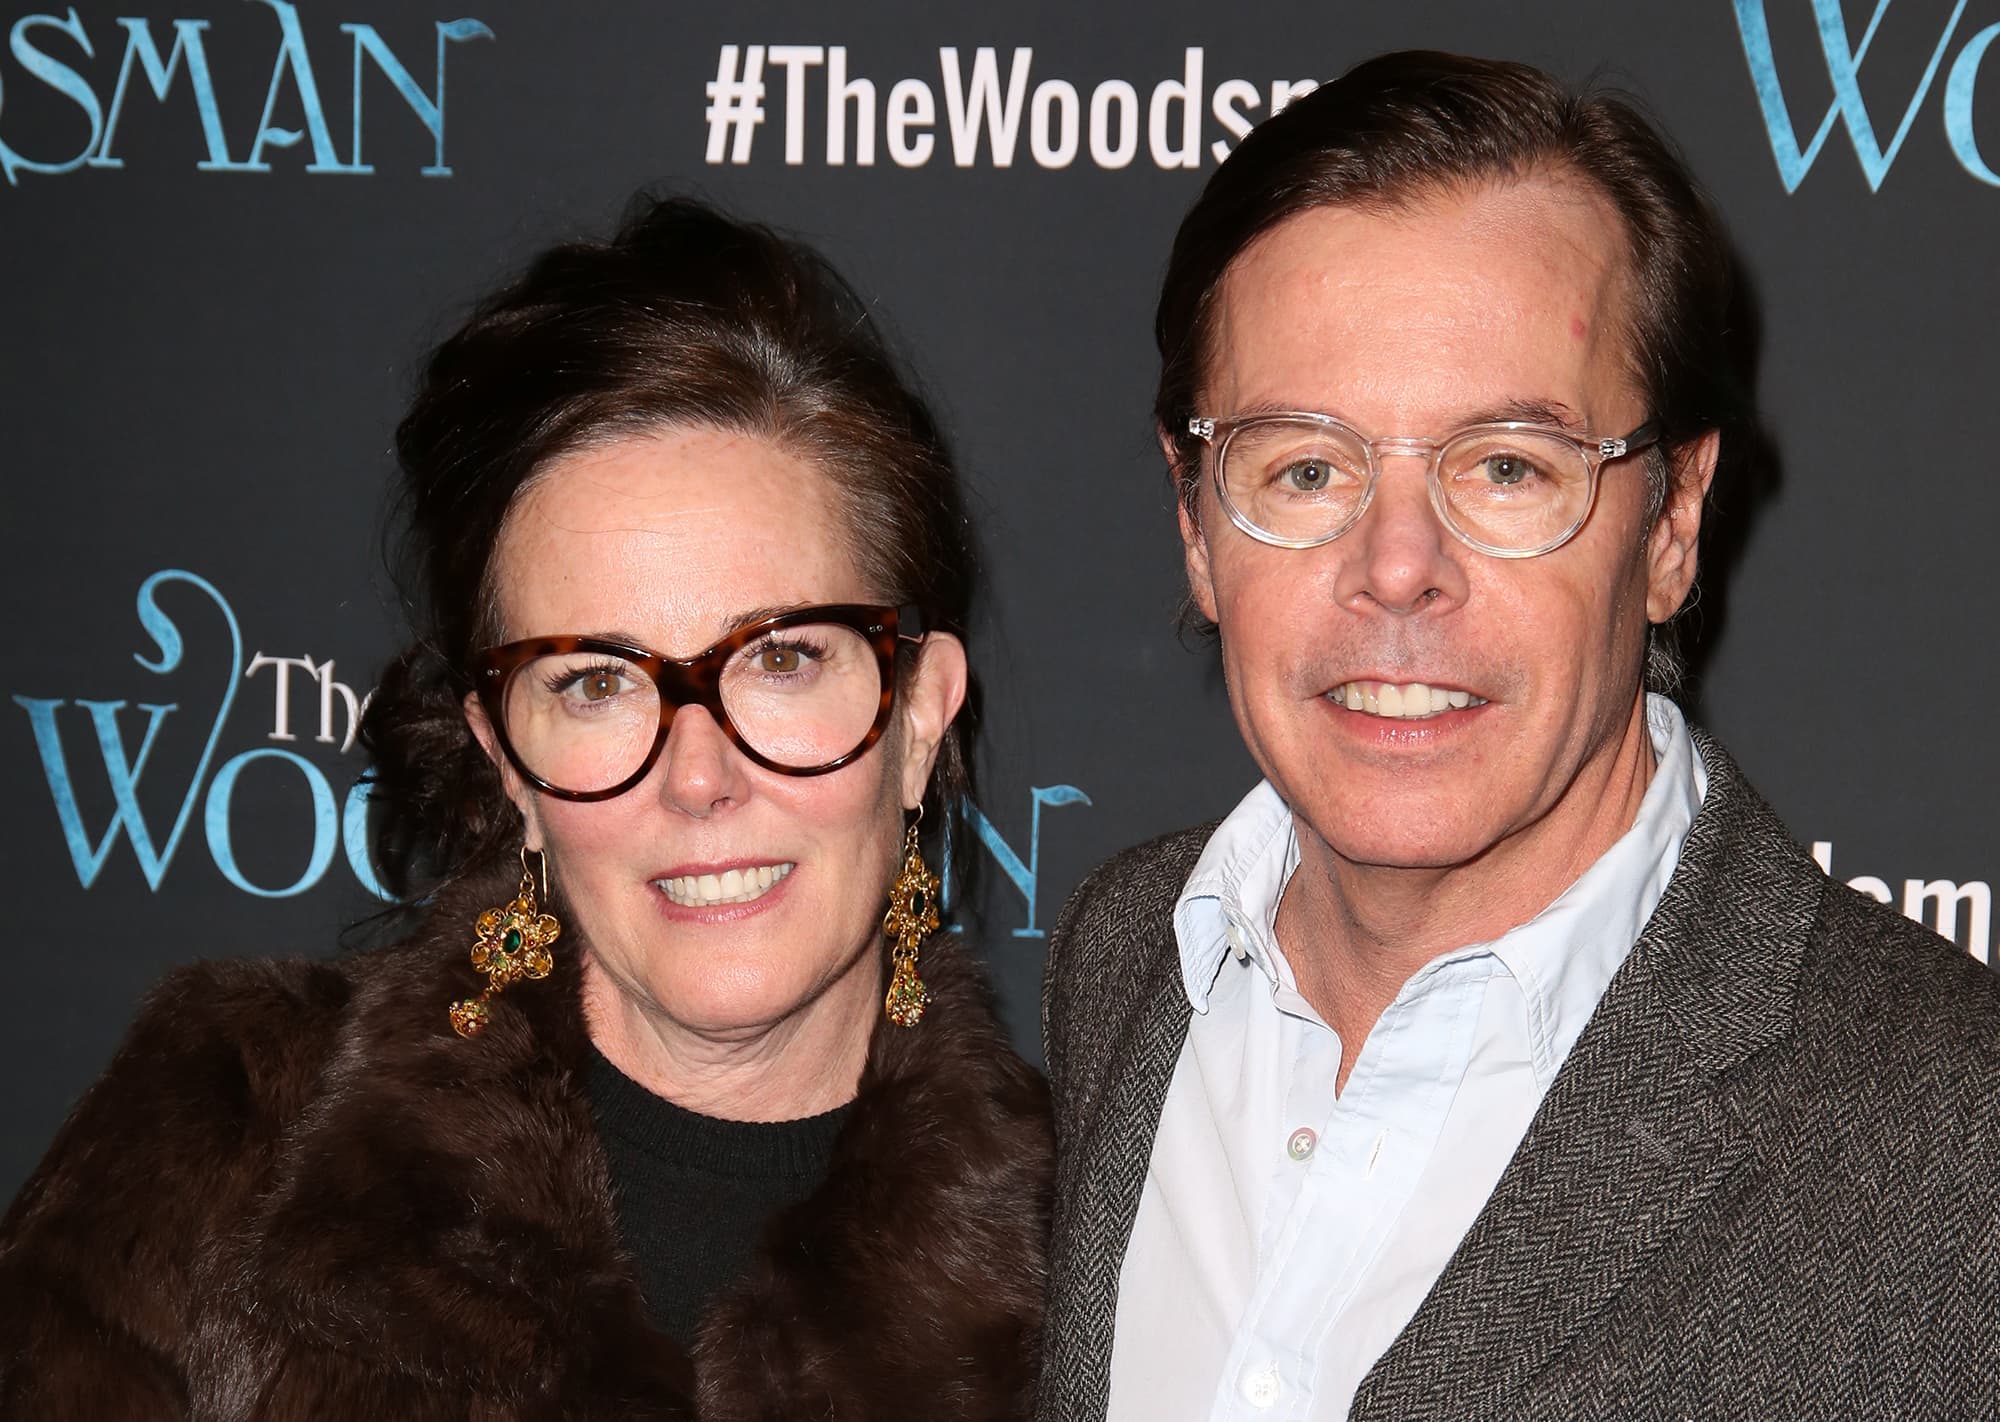 Fashion power couple and Kate Spade creators gamble on a new brand